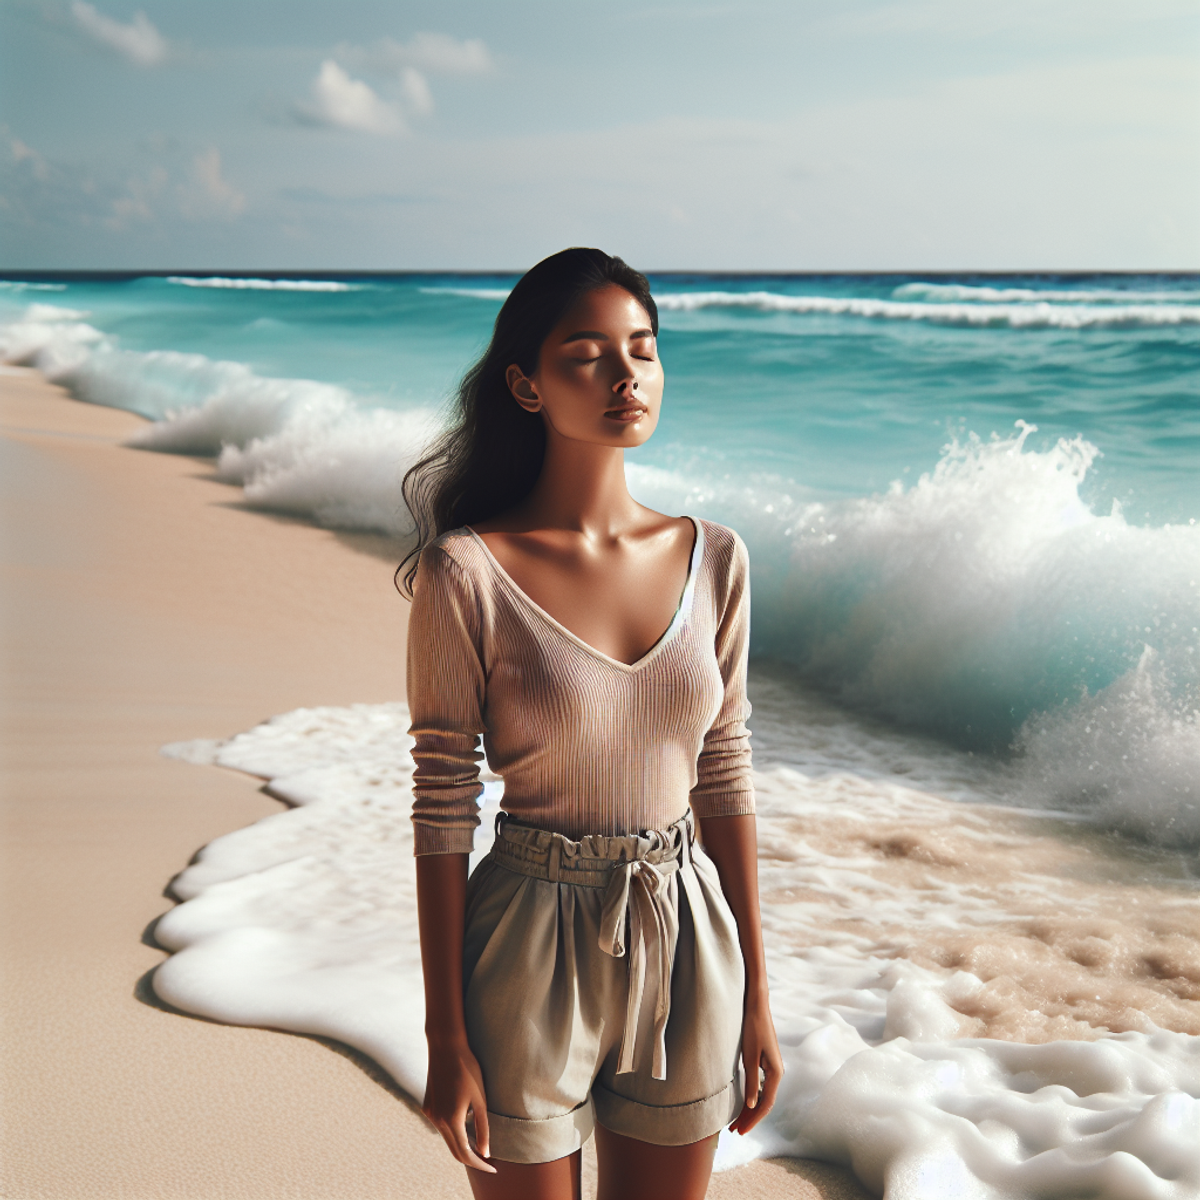 A South Asian woman standing on a tranquil beach with her eyes closed, feeling the energy of the ocean.